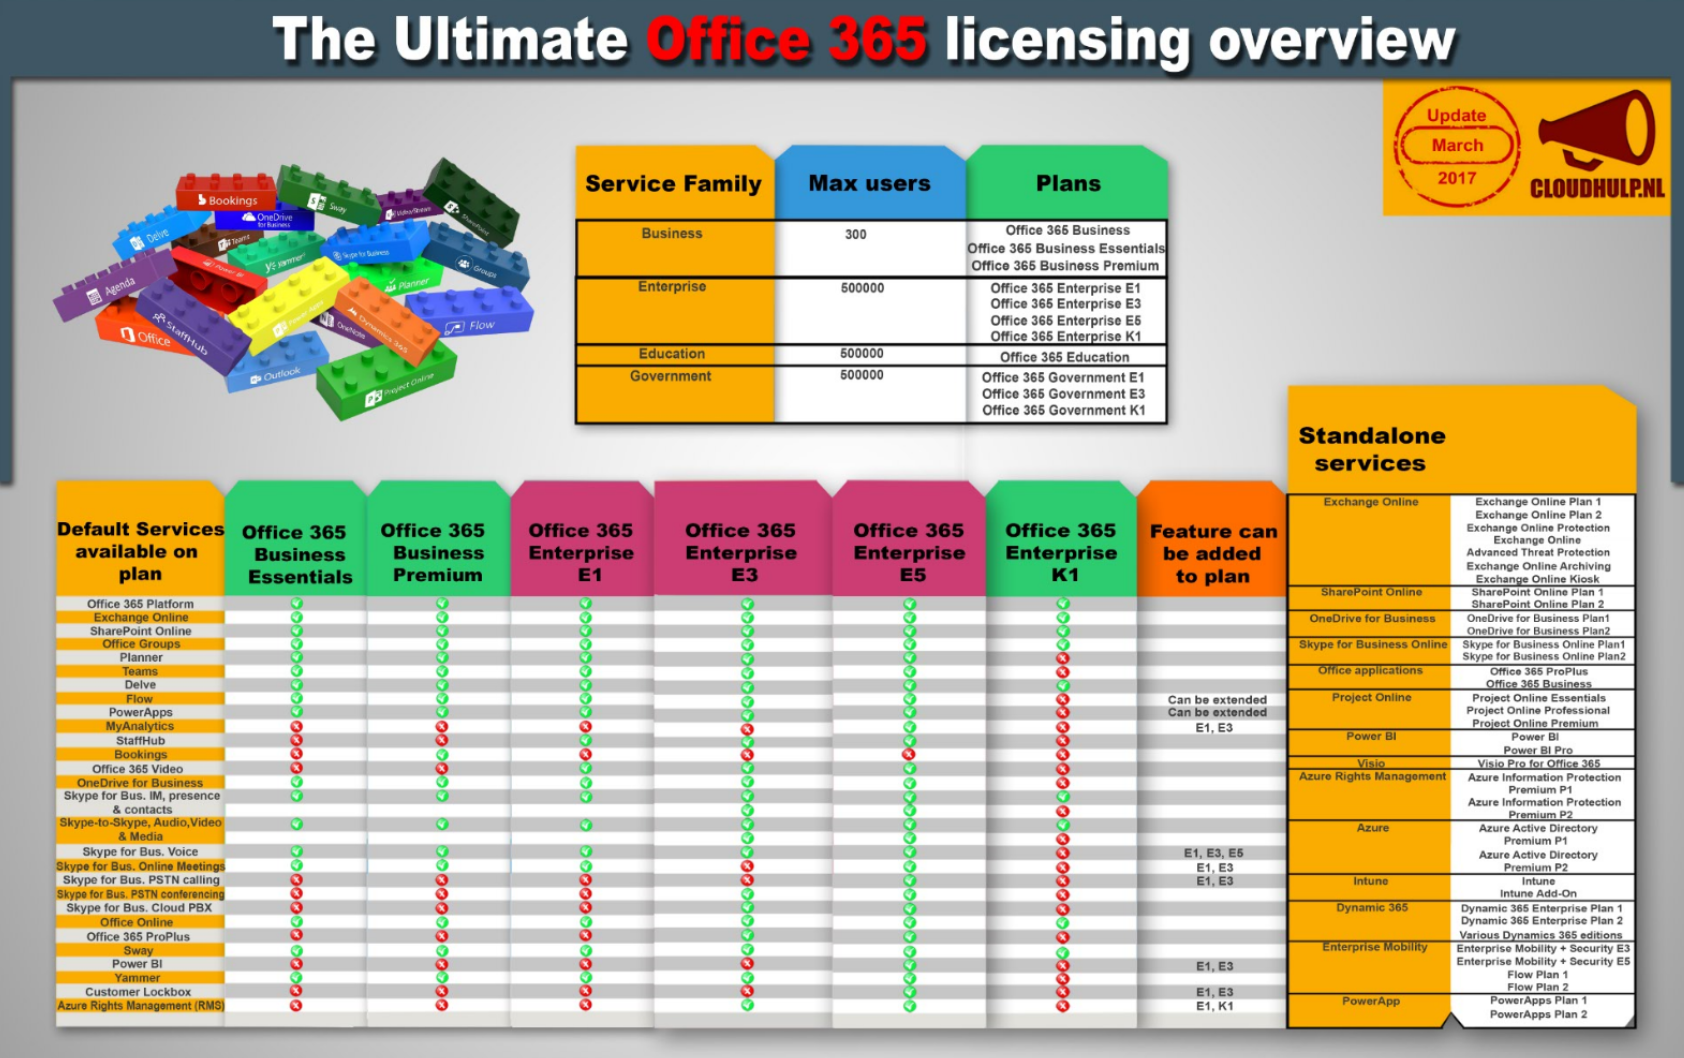 Office 365 licensing overiew - Microsoft Community Hub